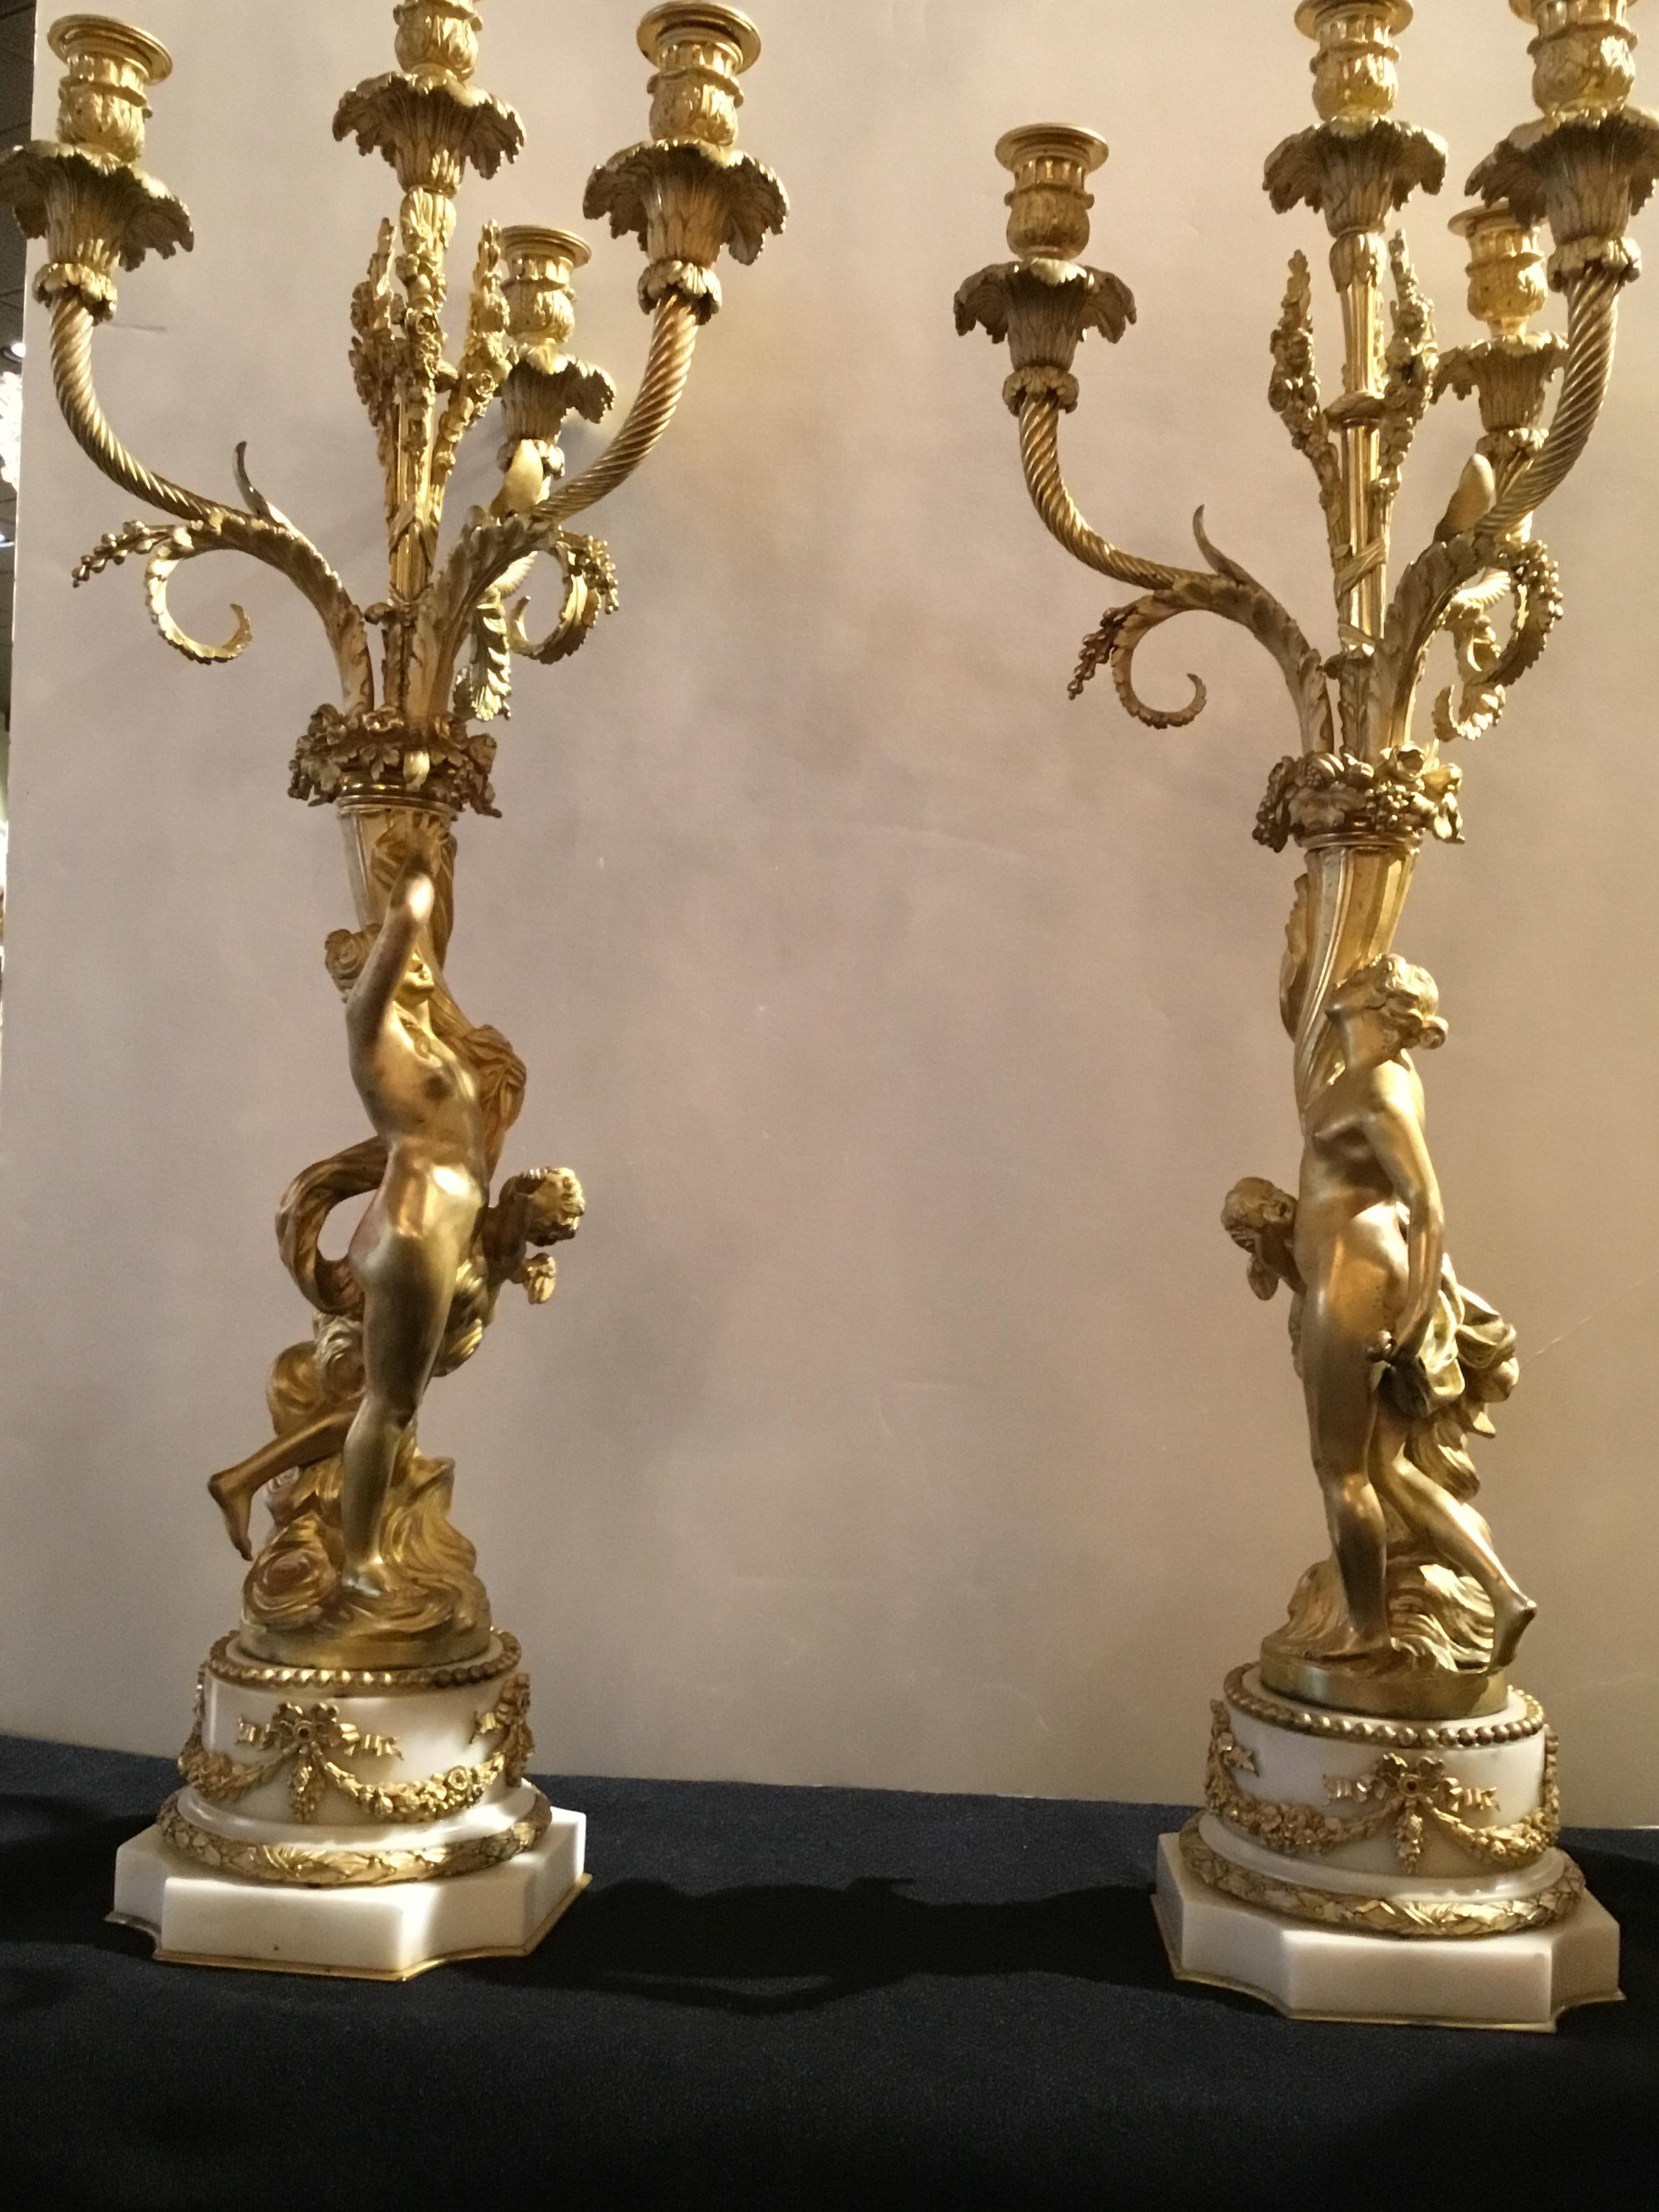 Pair of French Gilt Bronze Figural Candelabra circa 1790 on White Marble Bases 7